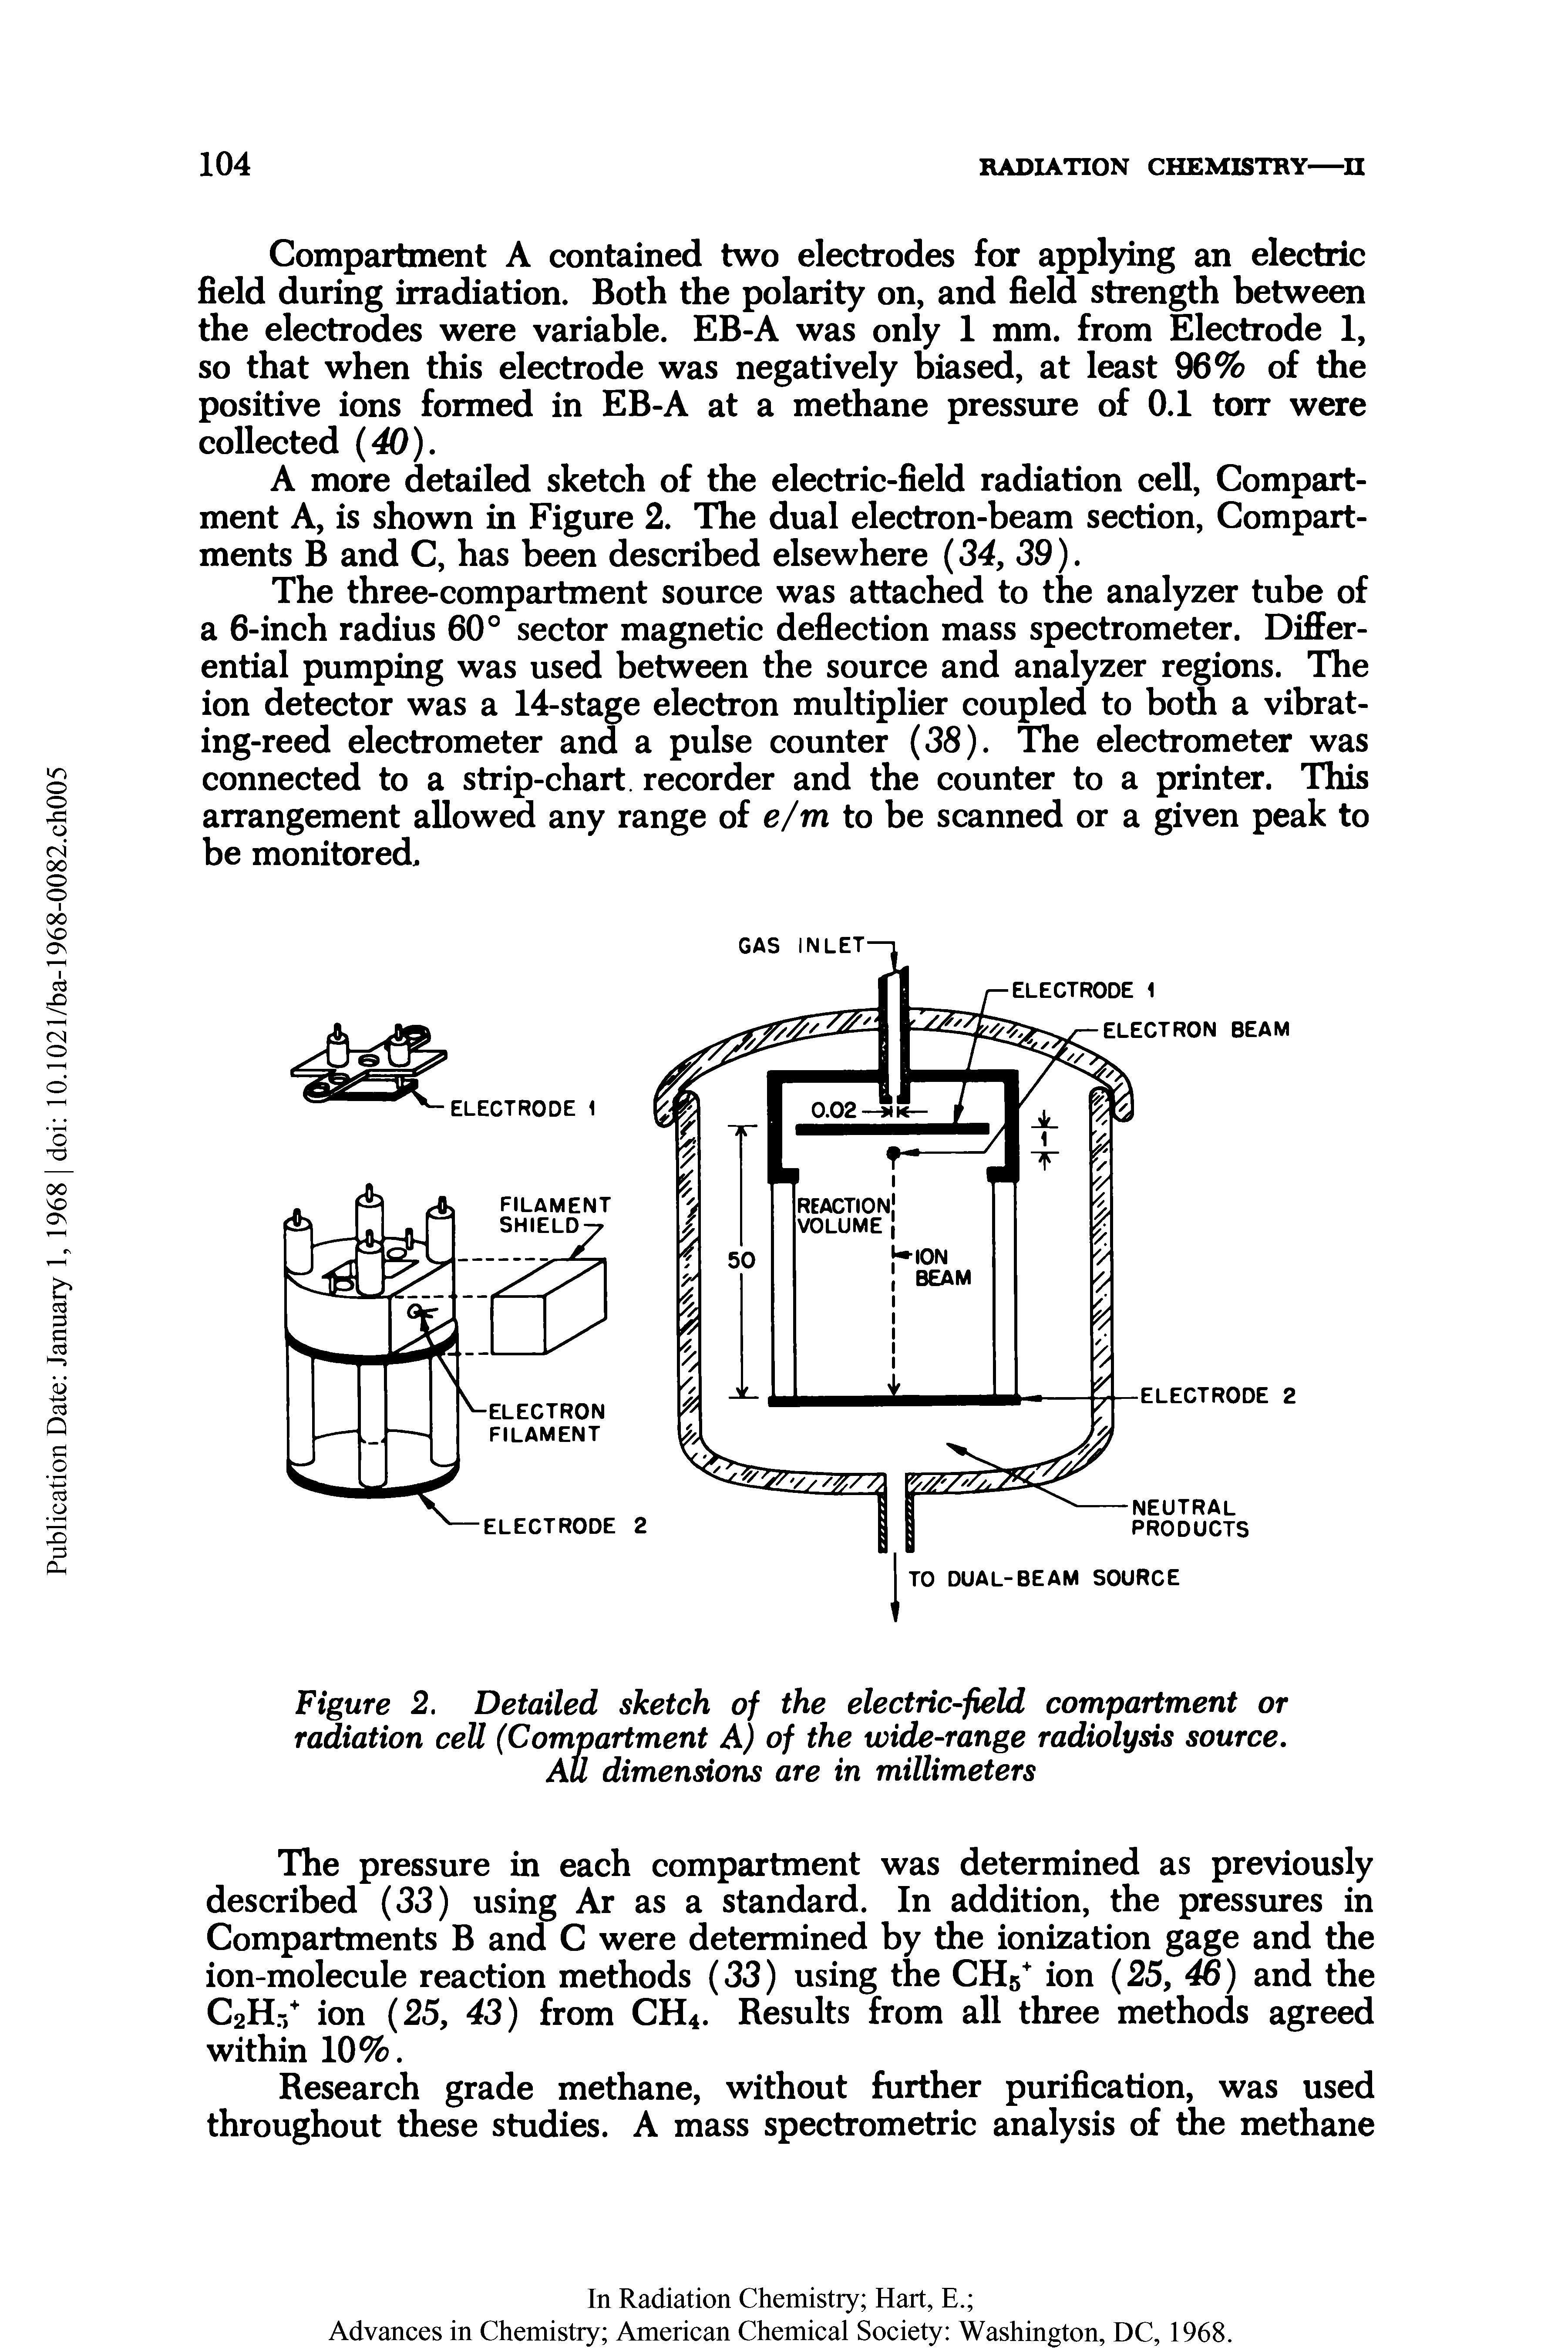 Figure 2. Detailed sketch of the electric-field compartment or radiation cell (Compartment A) of the wide-range radiolysis source.